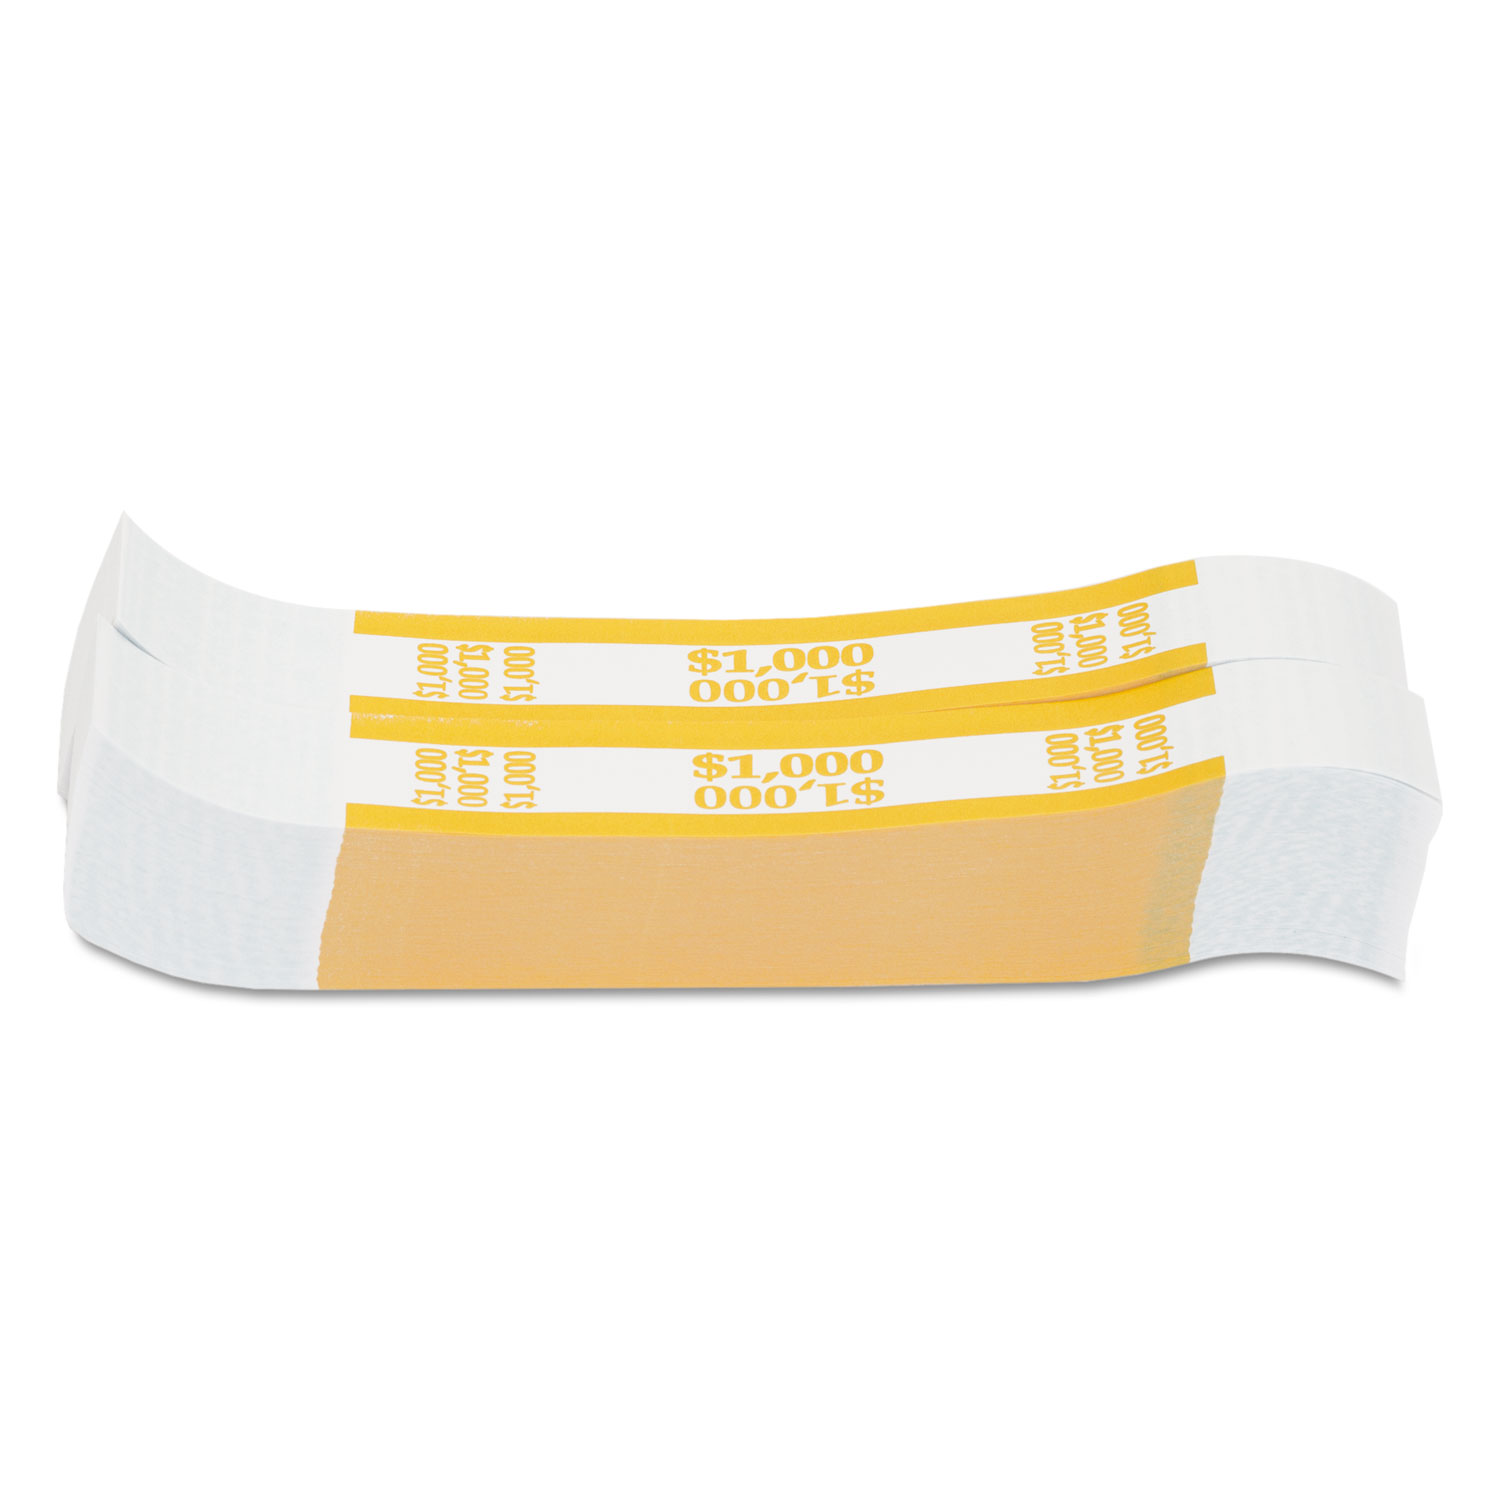  Pap-R Products 216070G12 Currency Straps, Yellow, $1,000 in $10 Bills, 1000 Bands/Pack (CTX401000) 